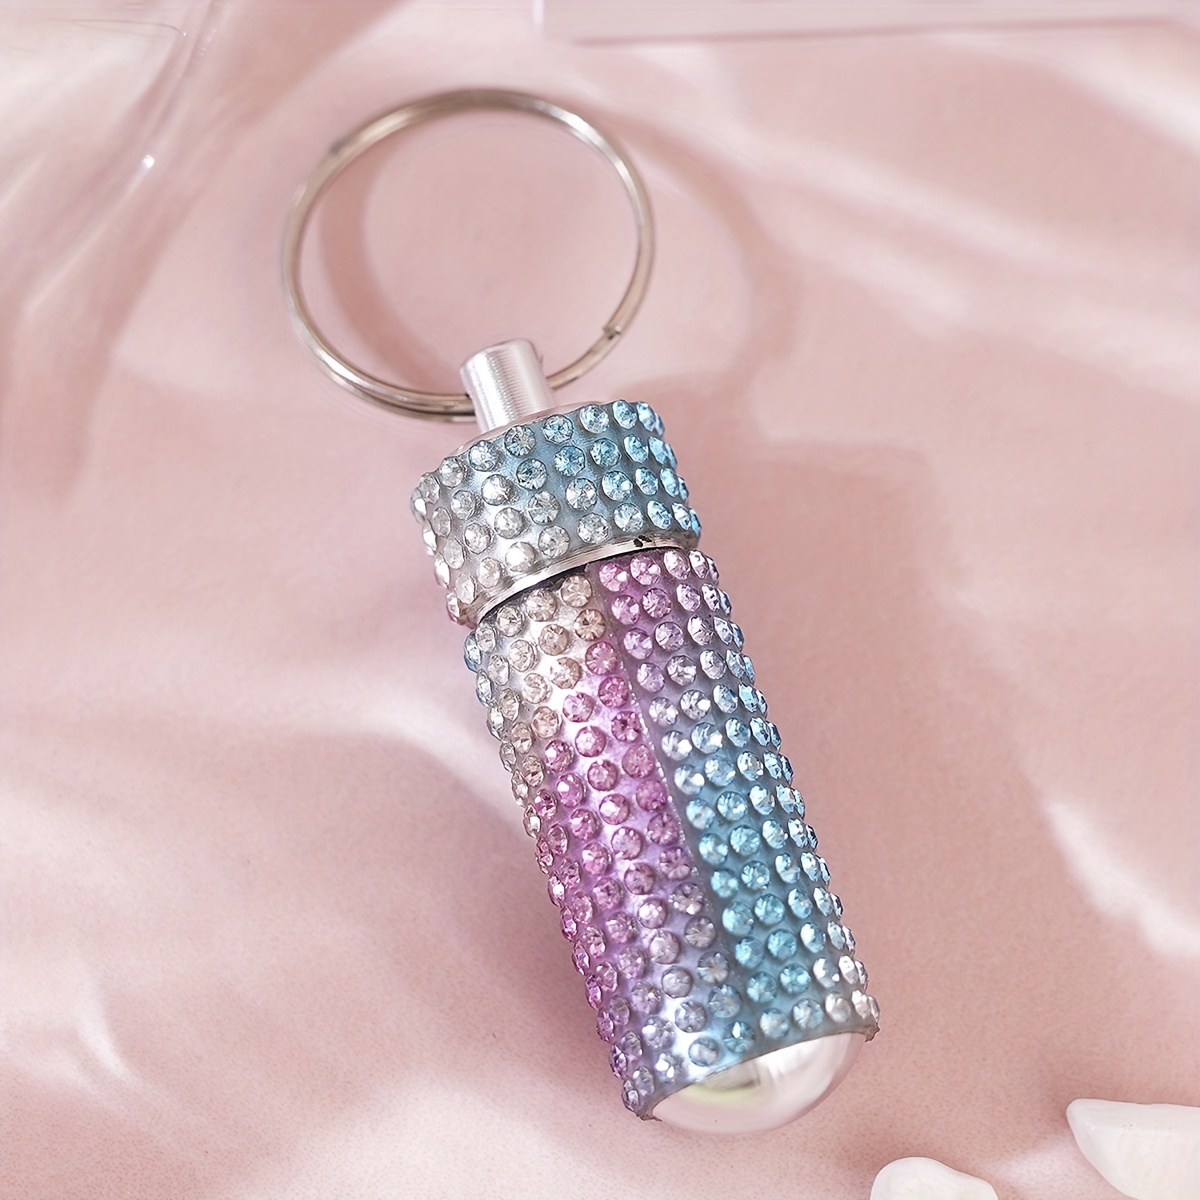 Bling Pill Box/Pill Container/Pill Case with Crystal Rhinestones